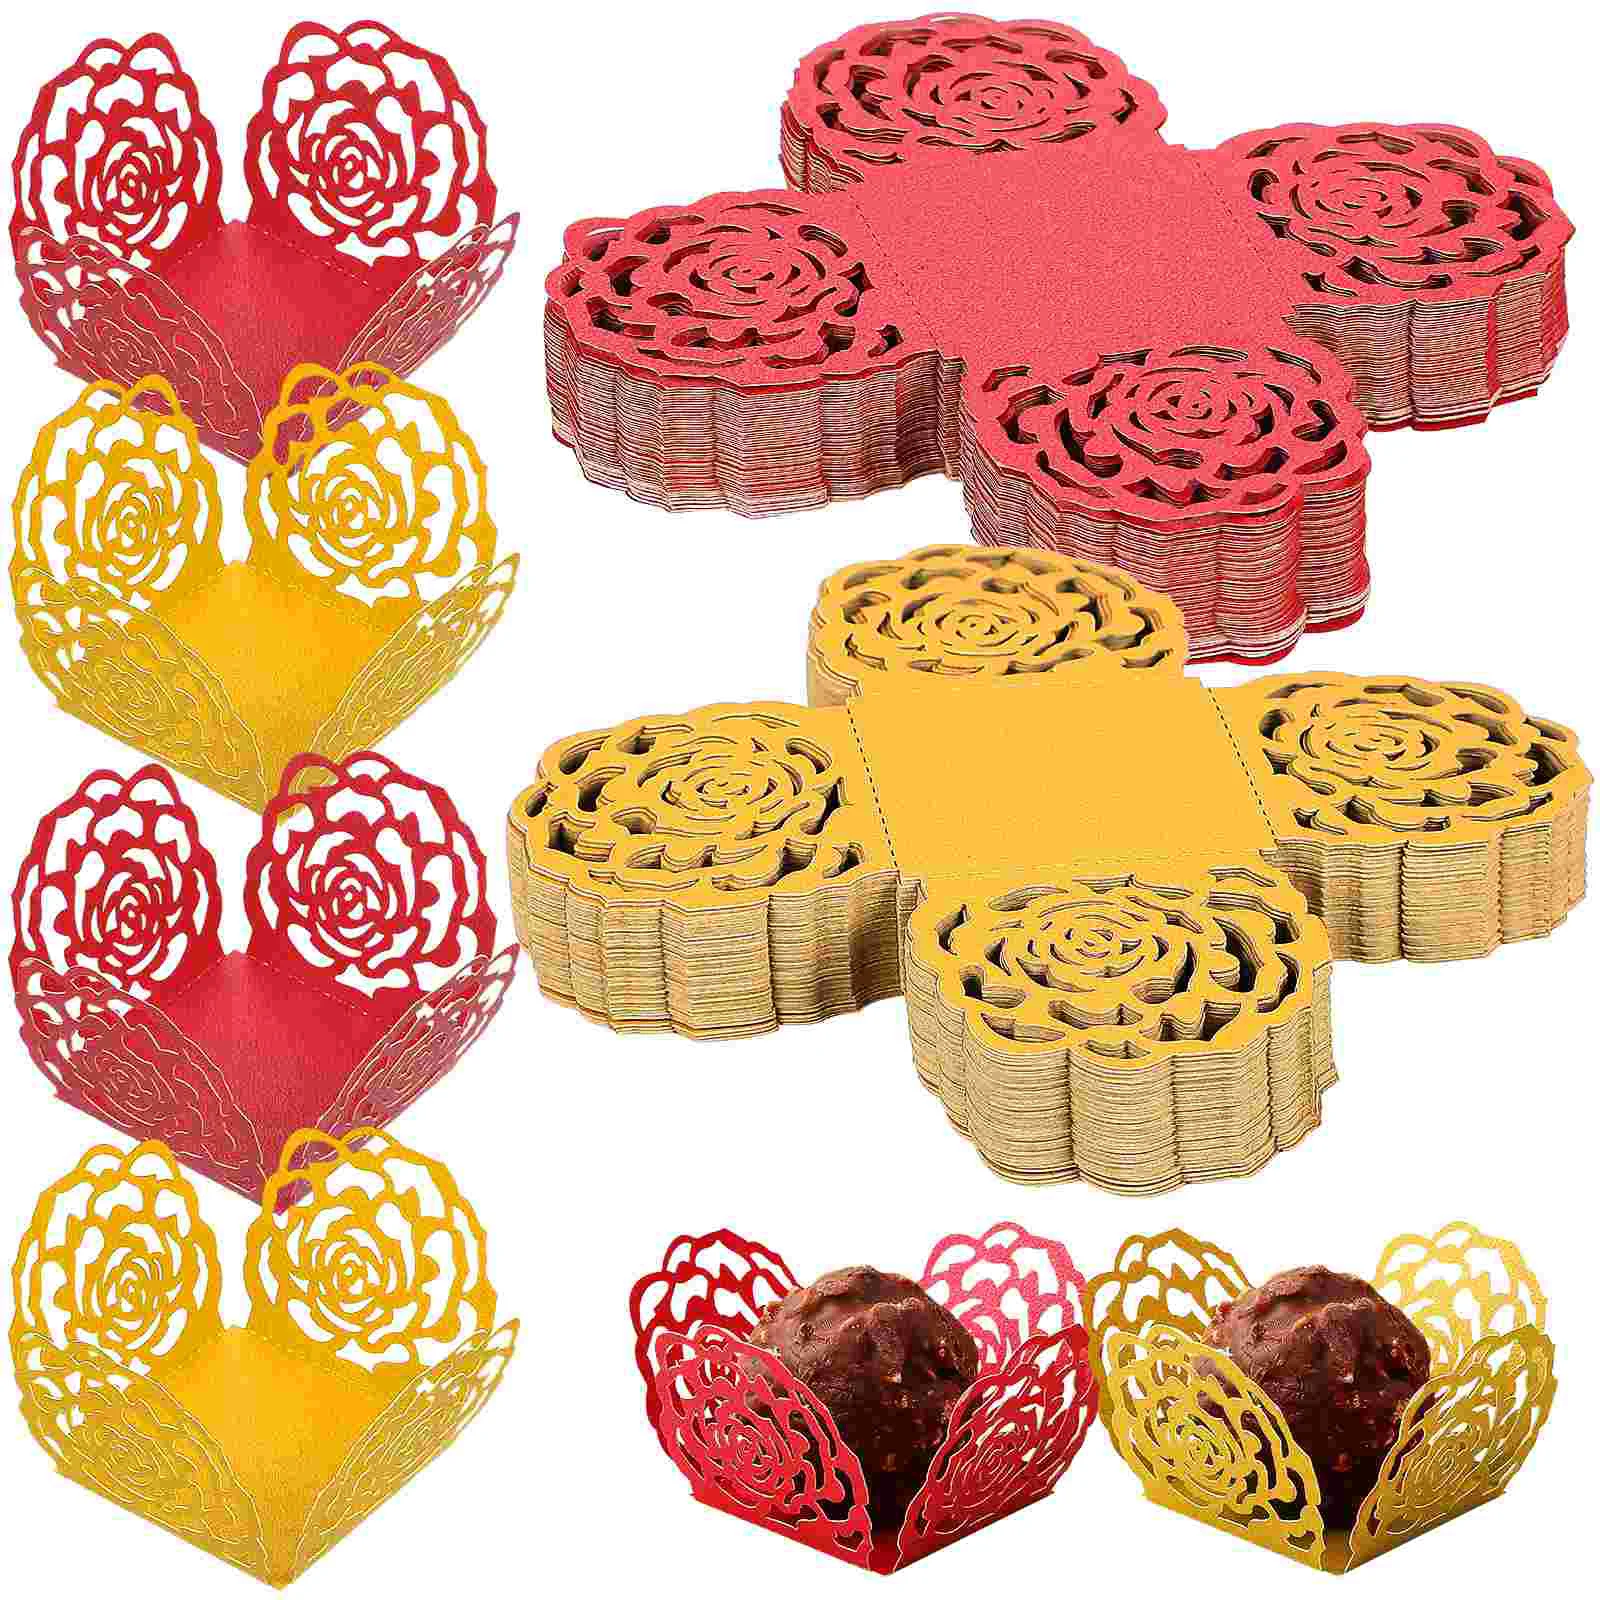 

100 Pcs Decorative Box Paper Chocolate Wrapper Cups Baking Liners Wedding Truffle Wrappers Dessert Cake White